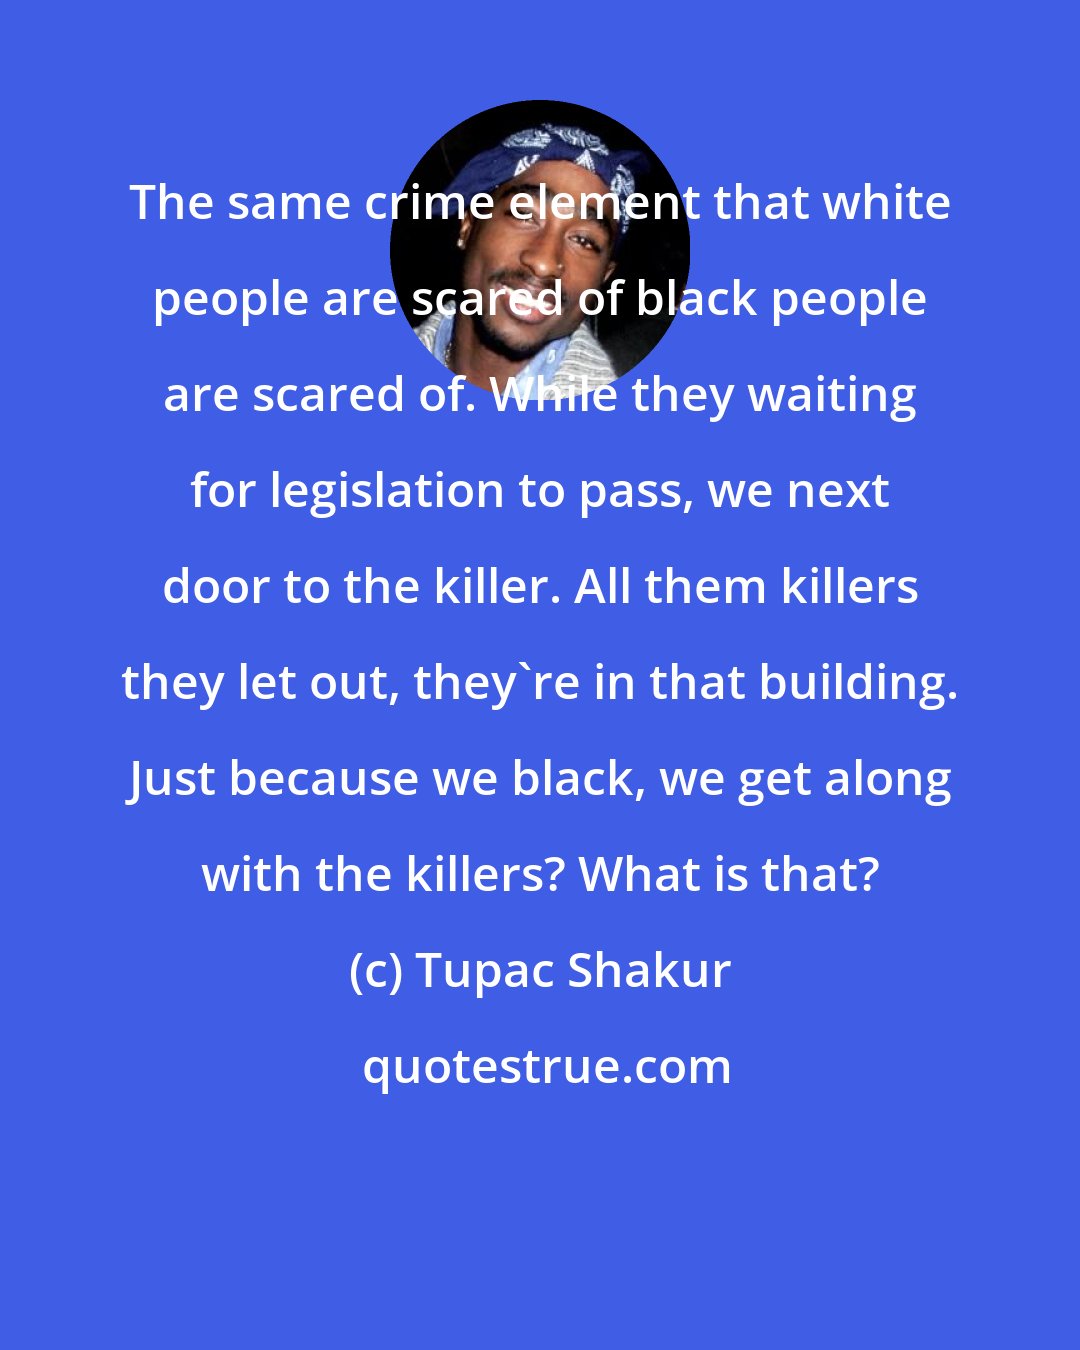 Tupac Shakur: The same crime element that white people are scared of black people are scared of. While they waiting for legislation to pass, we next door to the killer. All them killers they let out, they're in that building. Just because we black, we get along with the killers? What is that?